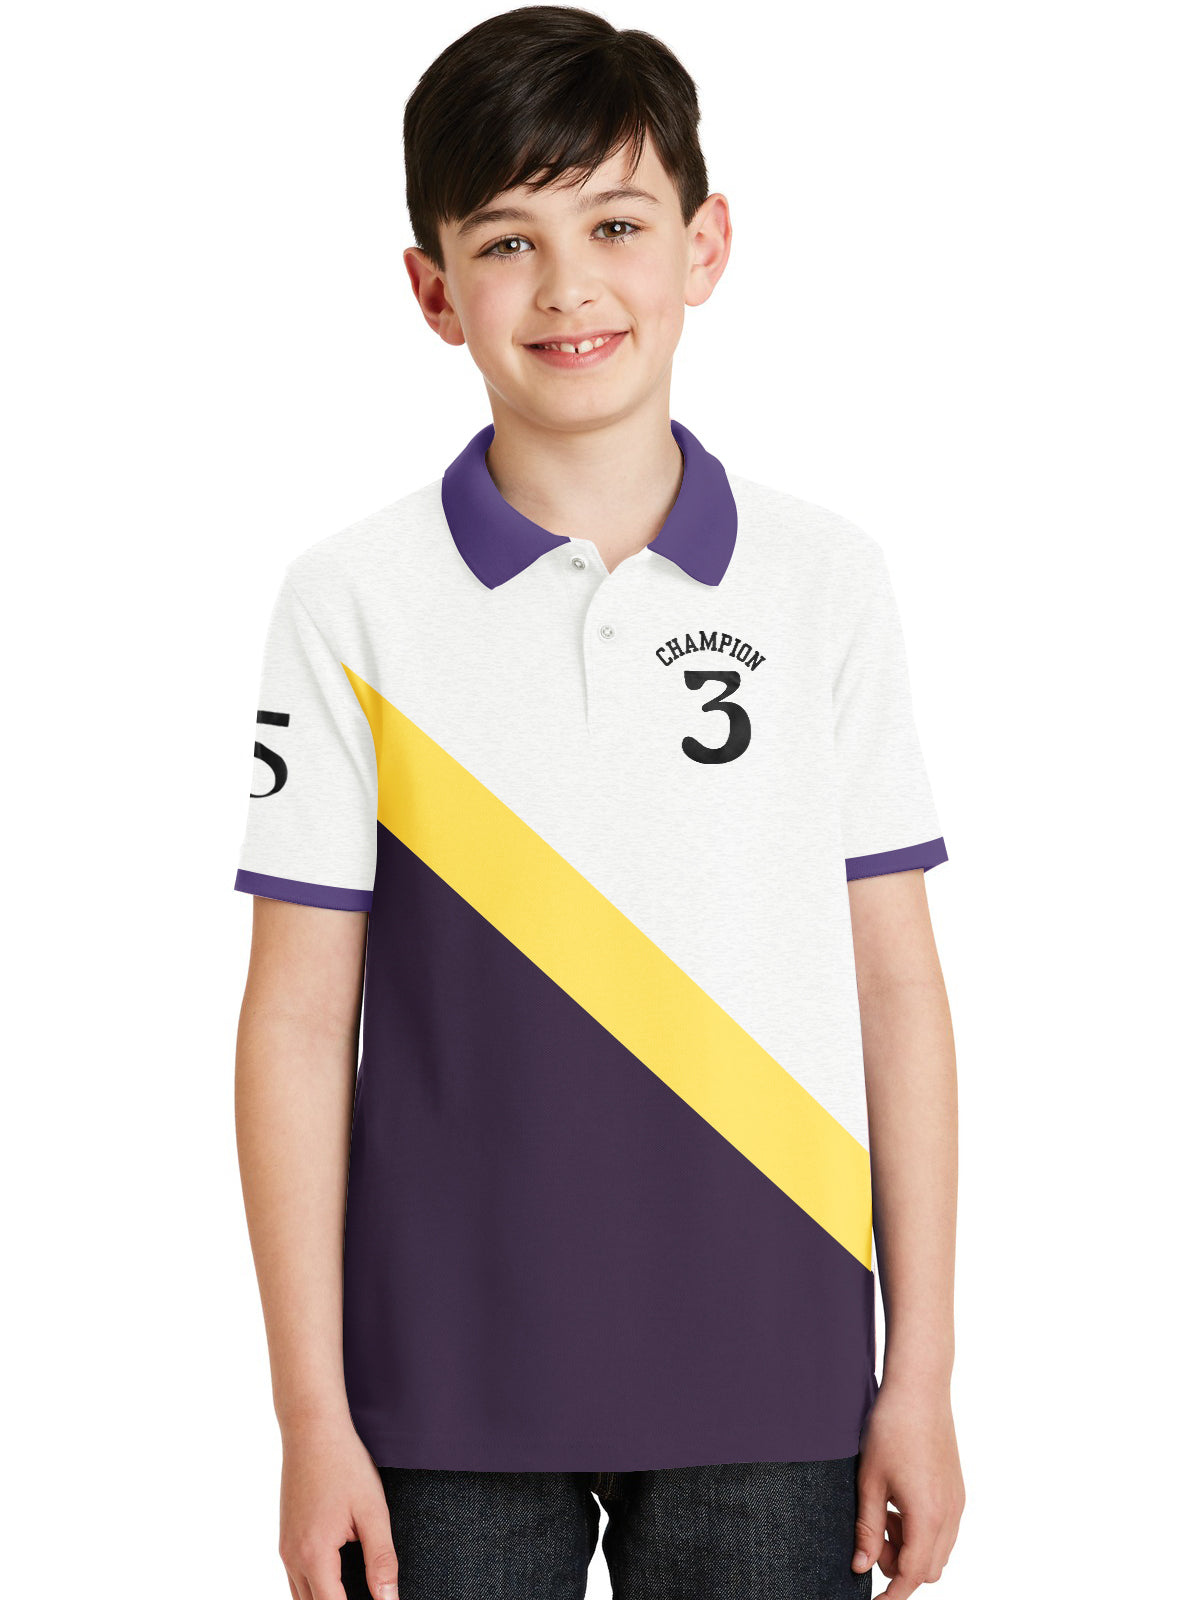 Champion Single Jersey Polo Shirt For Kids-Purple & Yellow with White-SP1681/RT2403